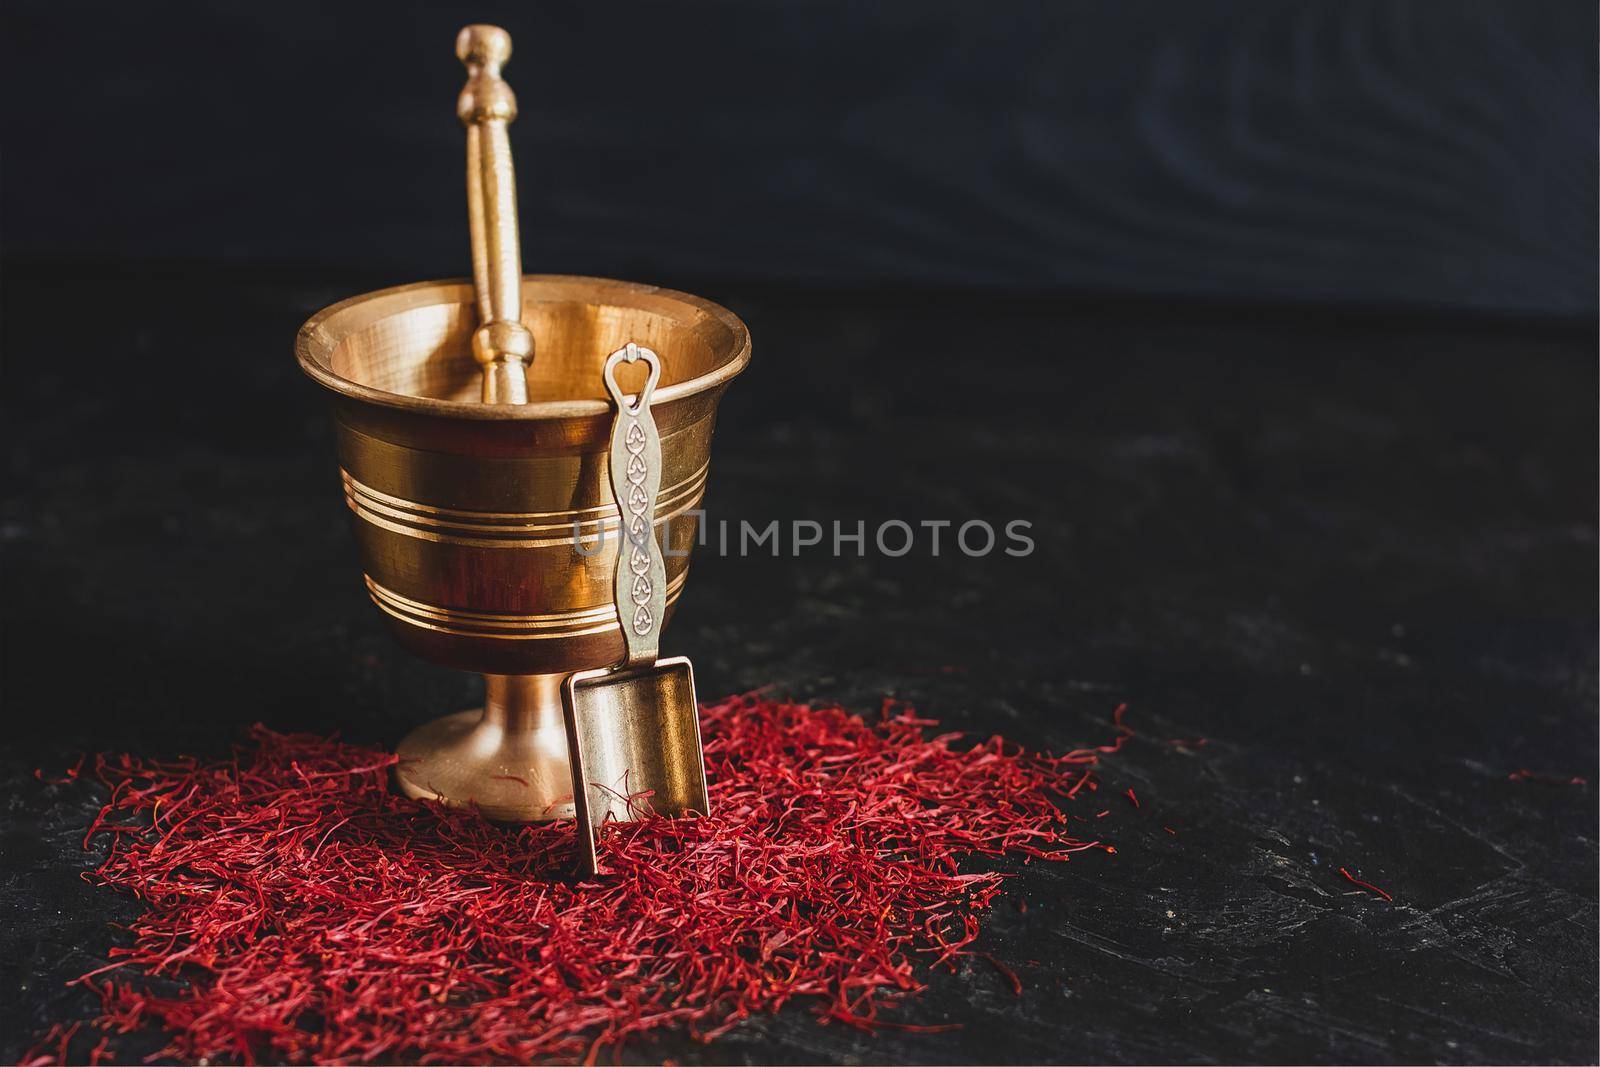 Raw organic red dried saffron spice on wooden background in vintage metal brass mortar with pestle, glass jar and tube by mmp1206